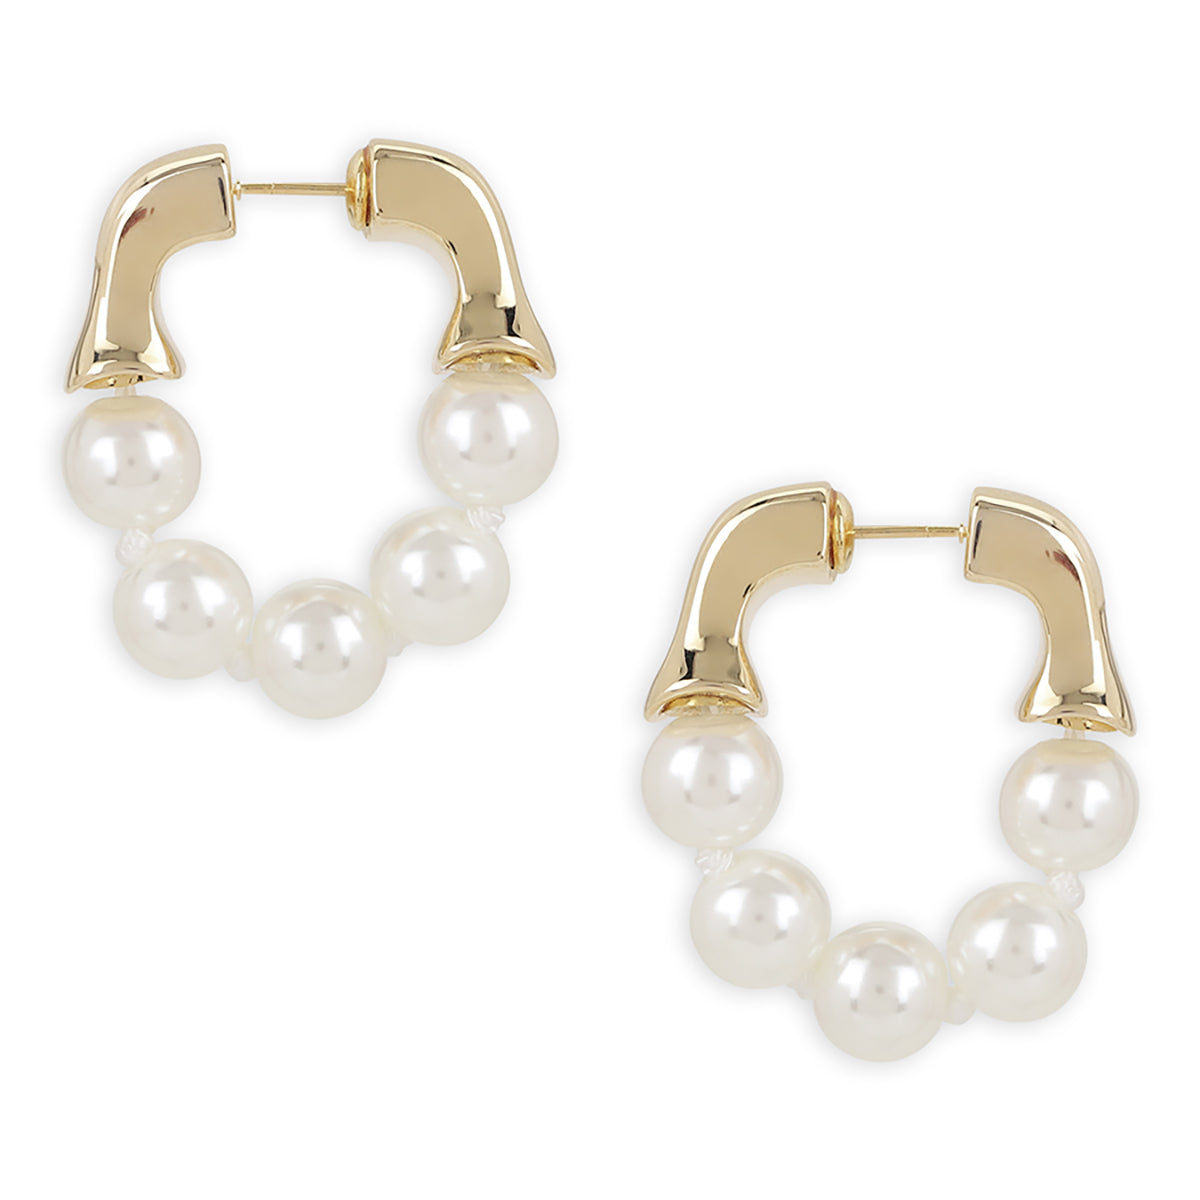 White & Gold-Toned Contemporary Hoop Earrings